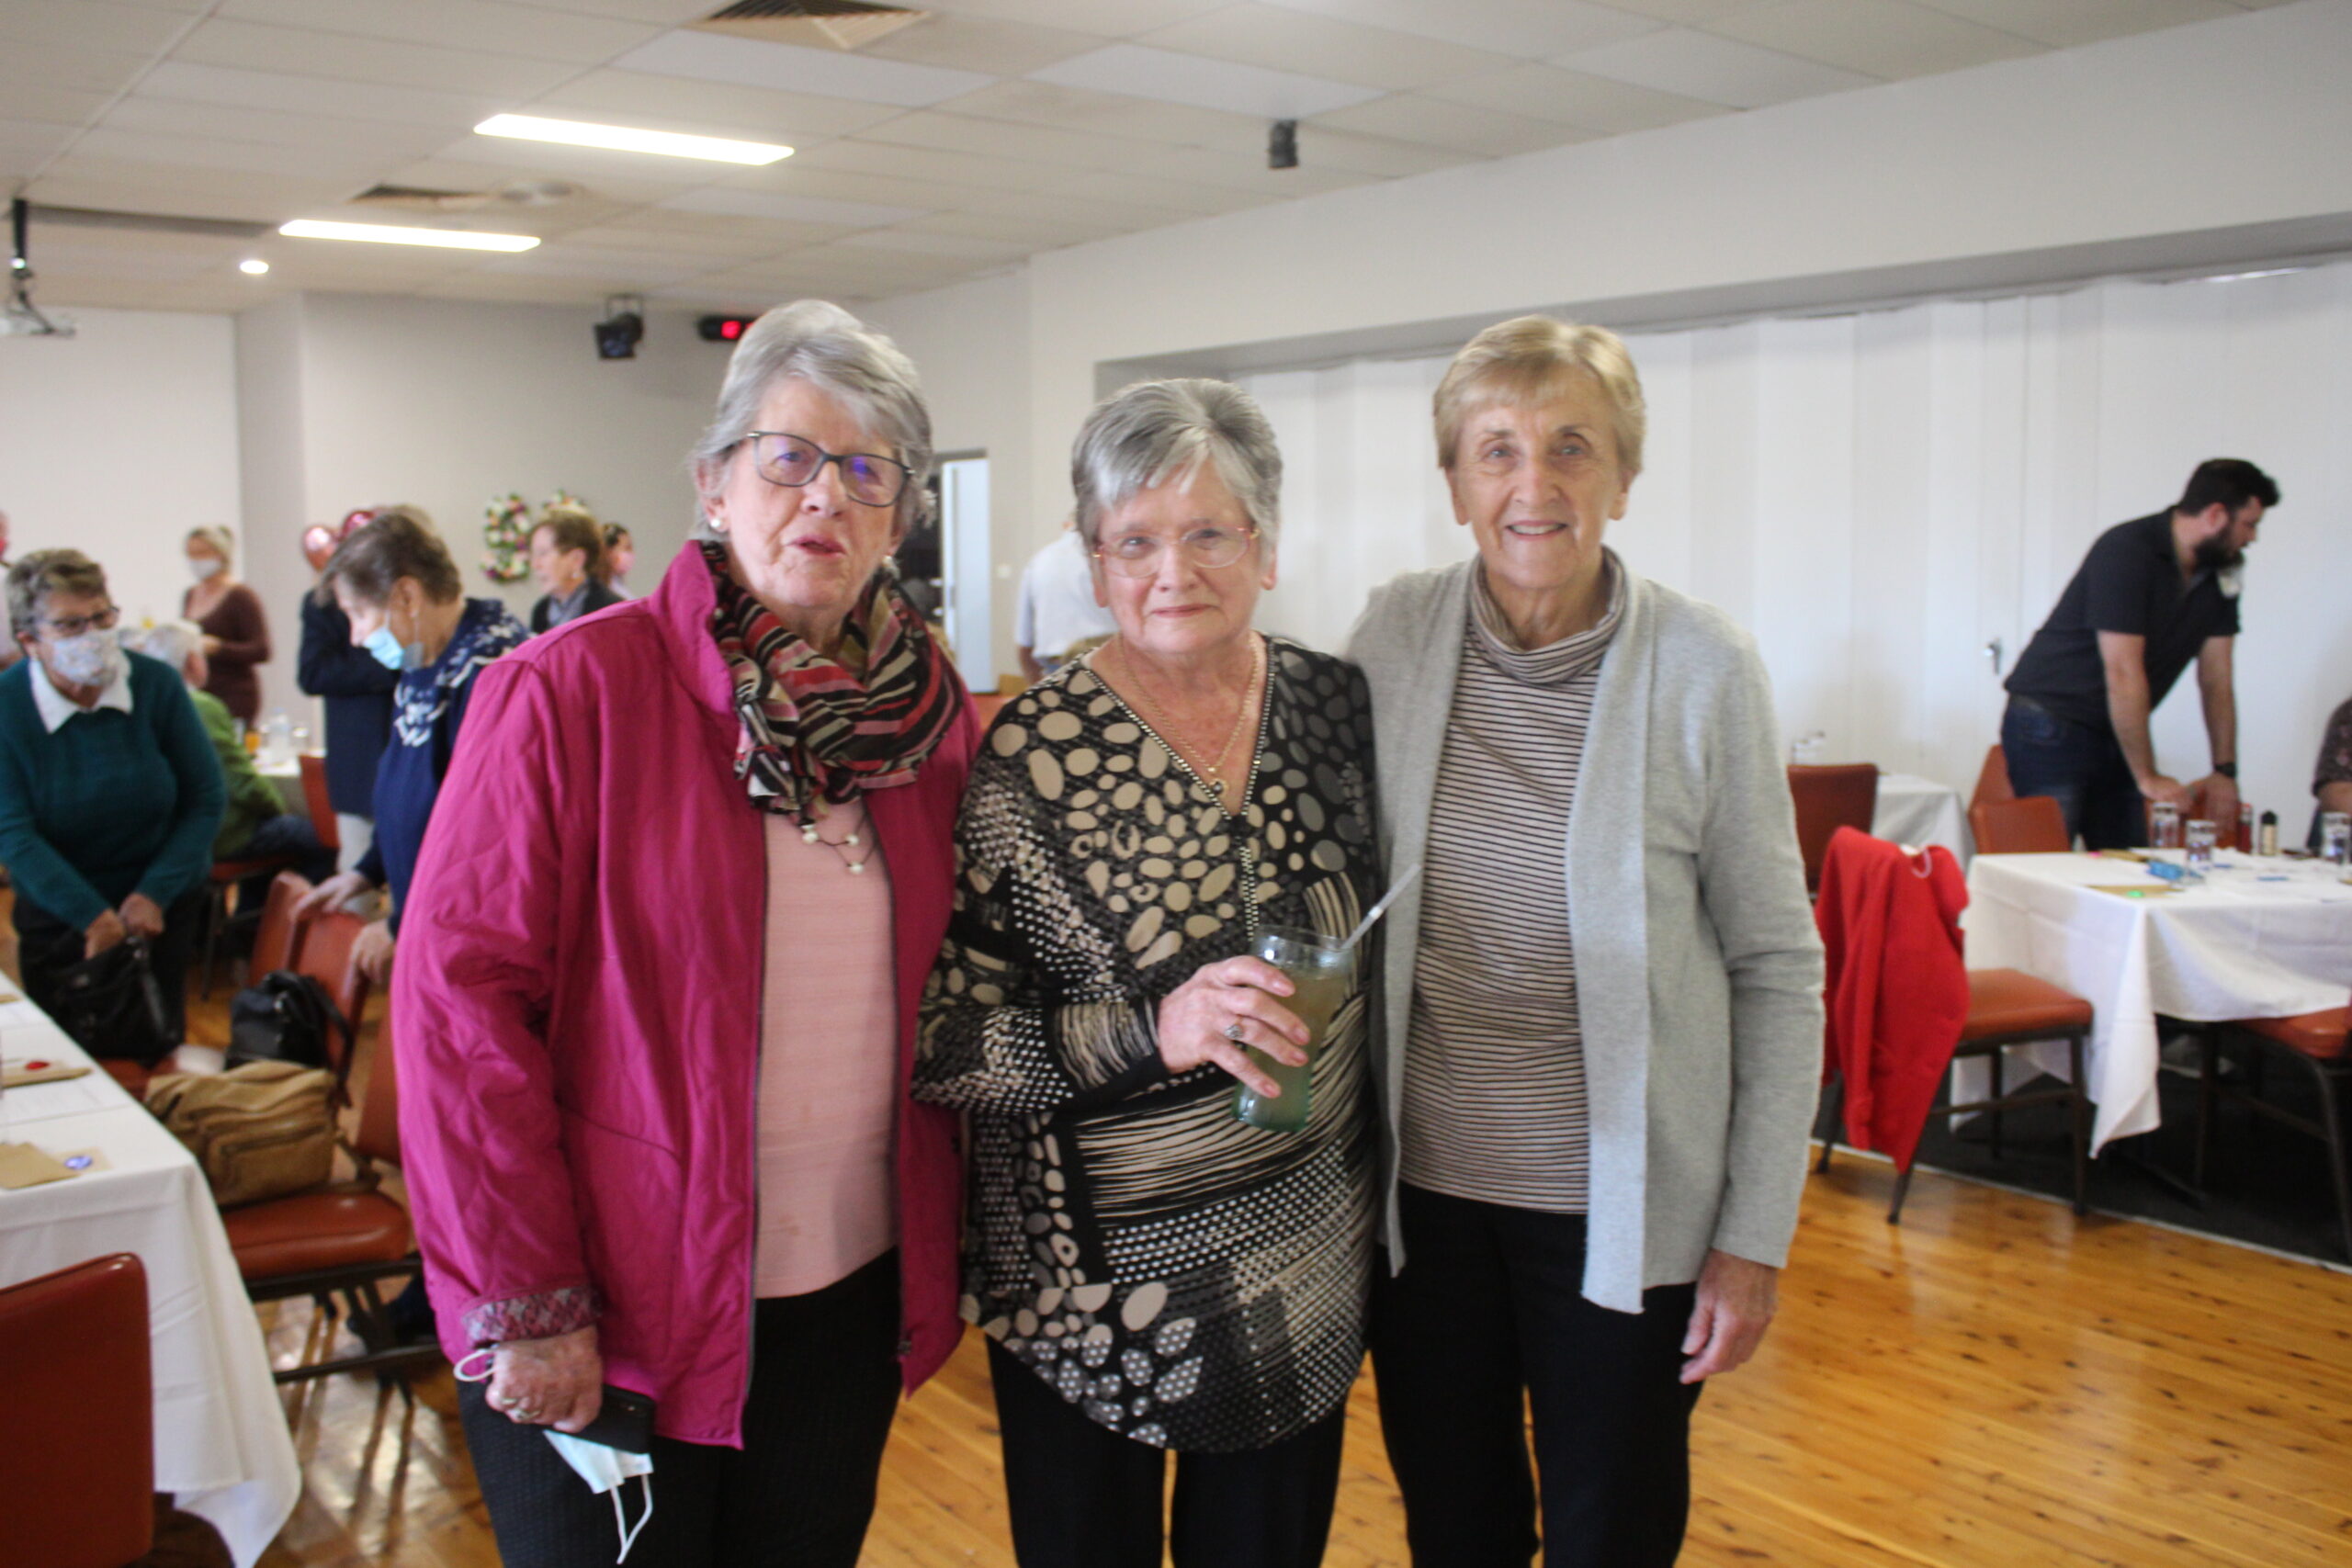 Lyn Wedesweiler, Dawn Armstrong and Di Chessells.